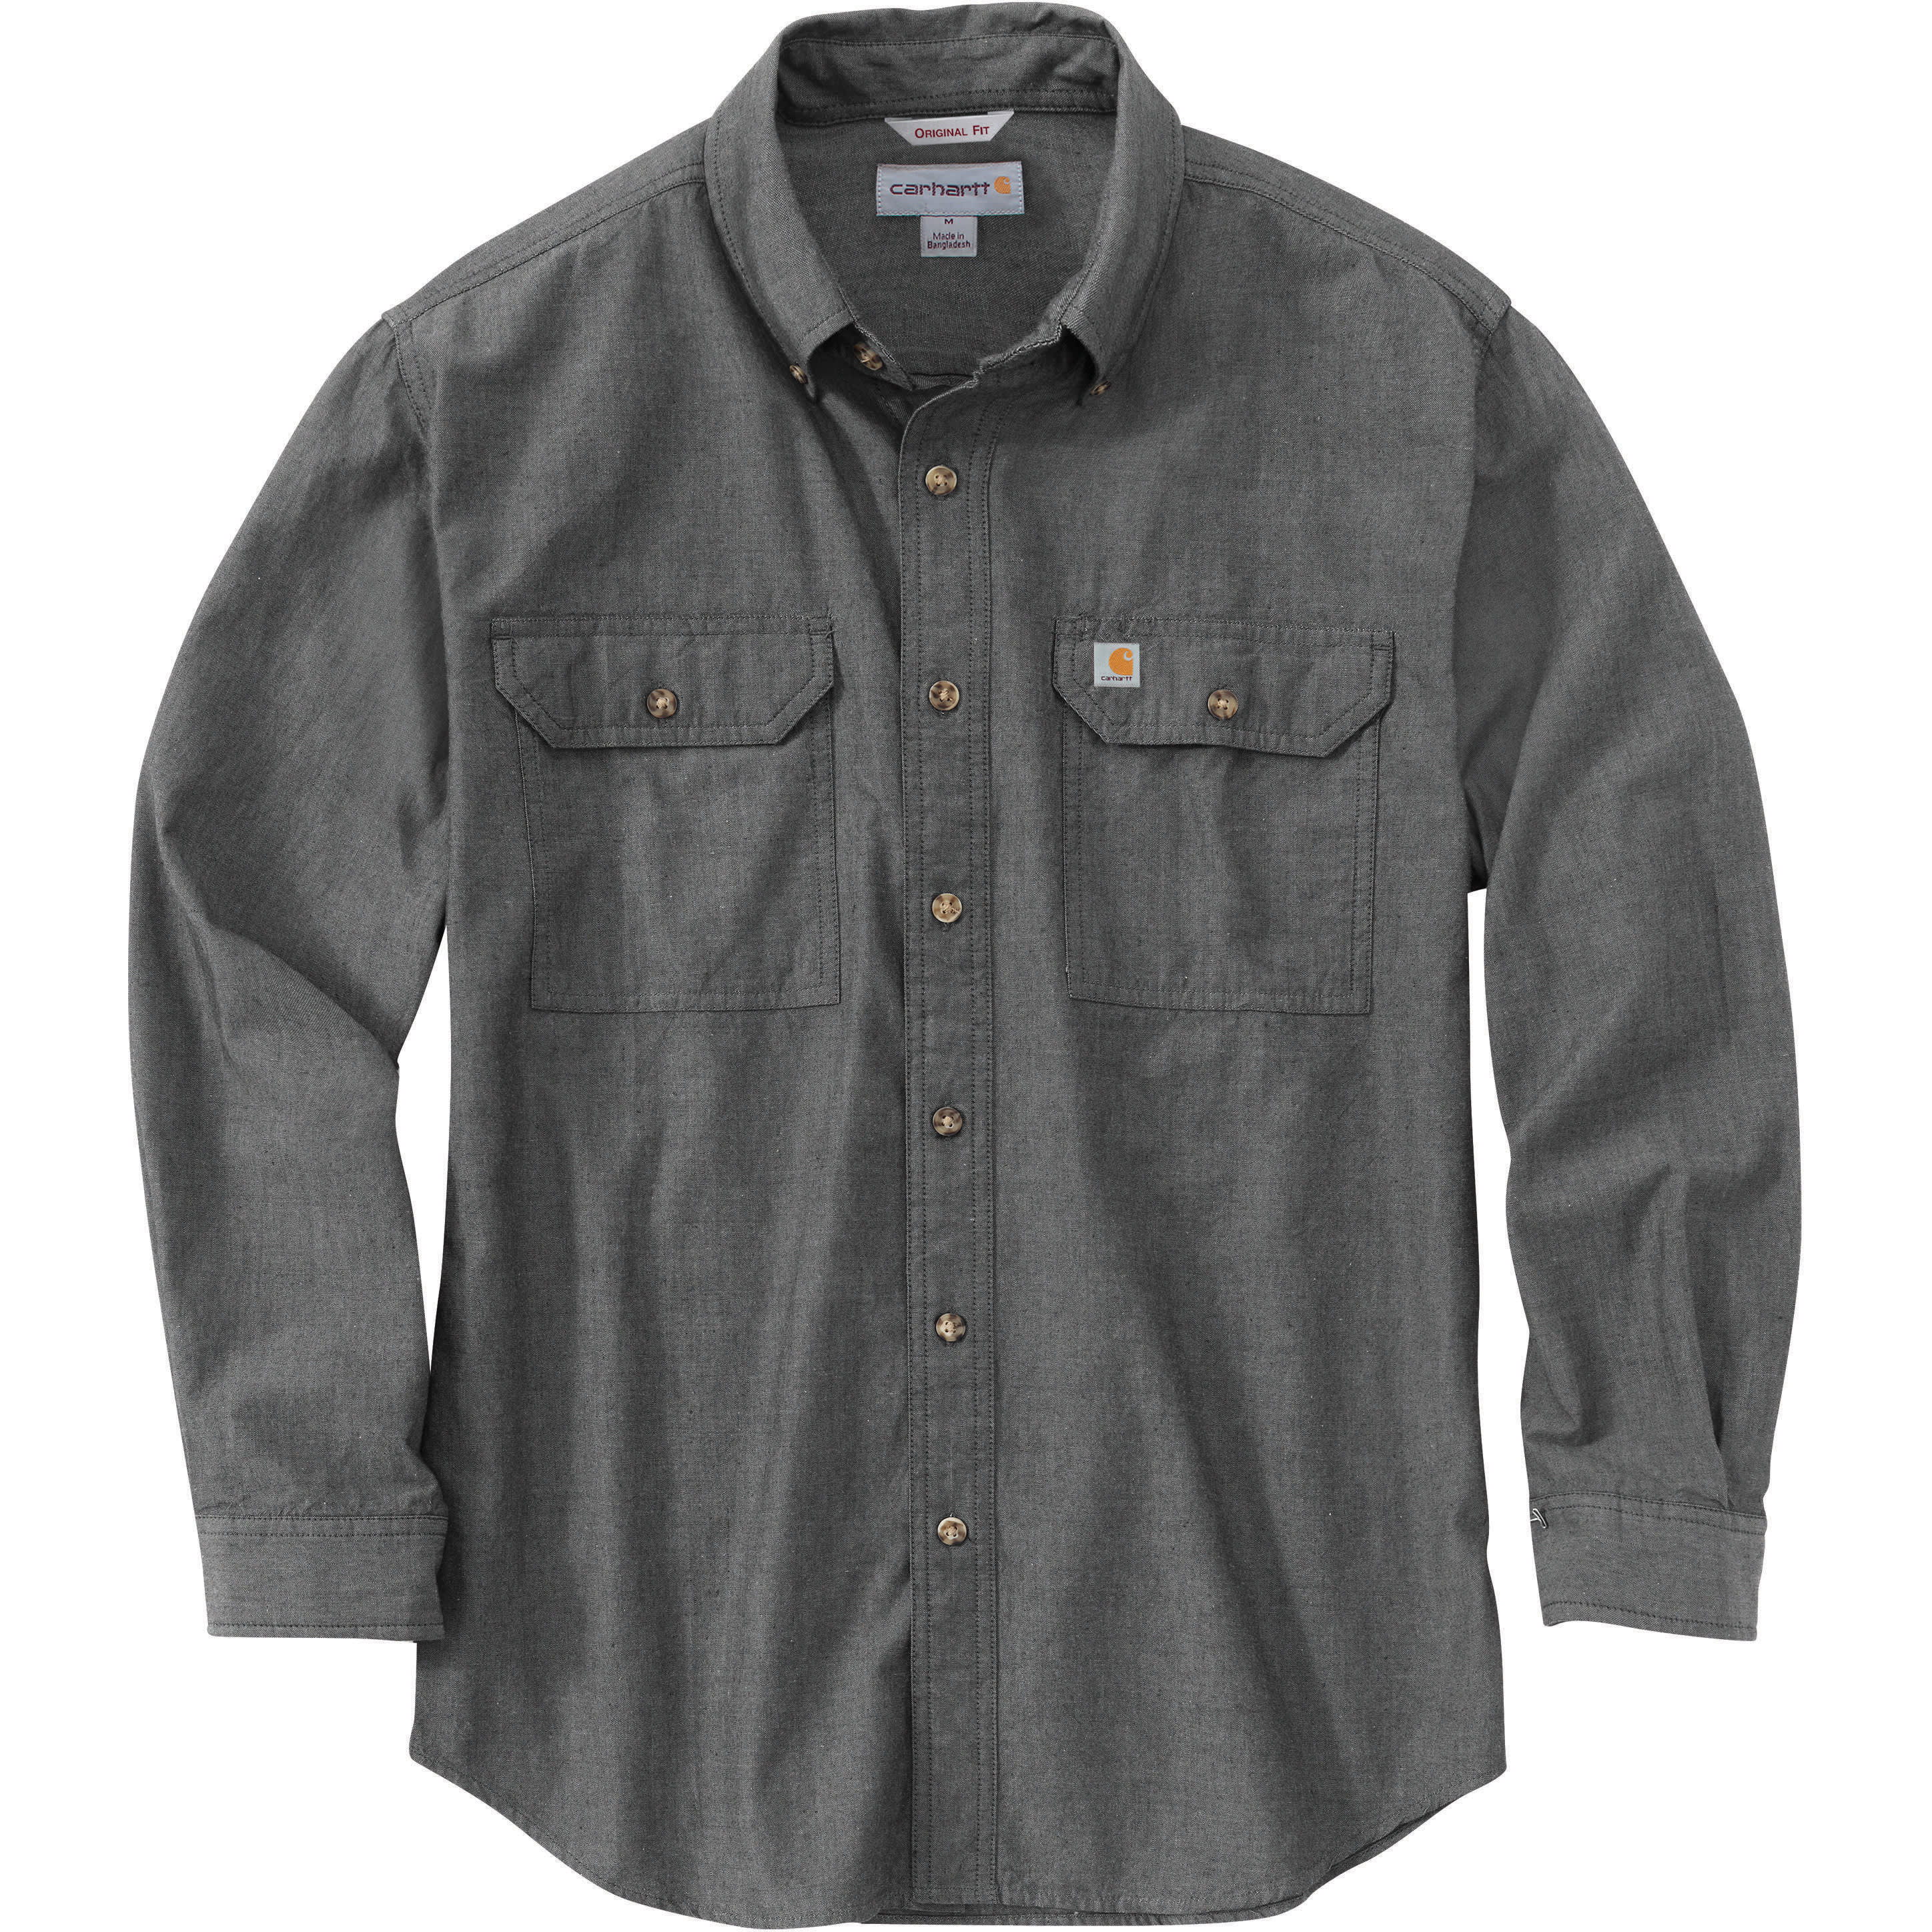 Men's Base Layer Thermal Shirt - Carhartt Force® - Midweight - 100% Cotton, Men's Best Sellers